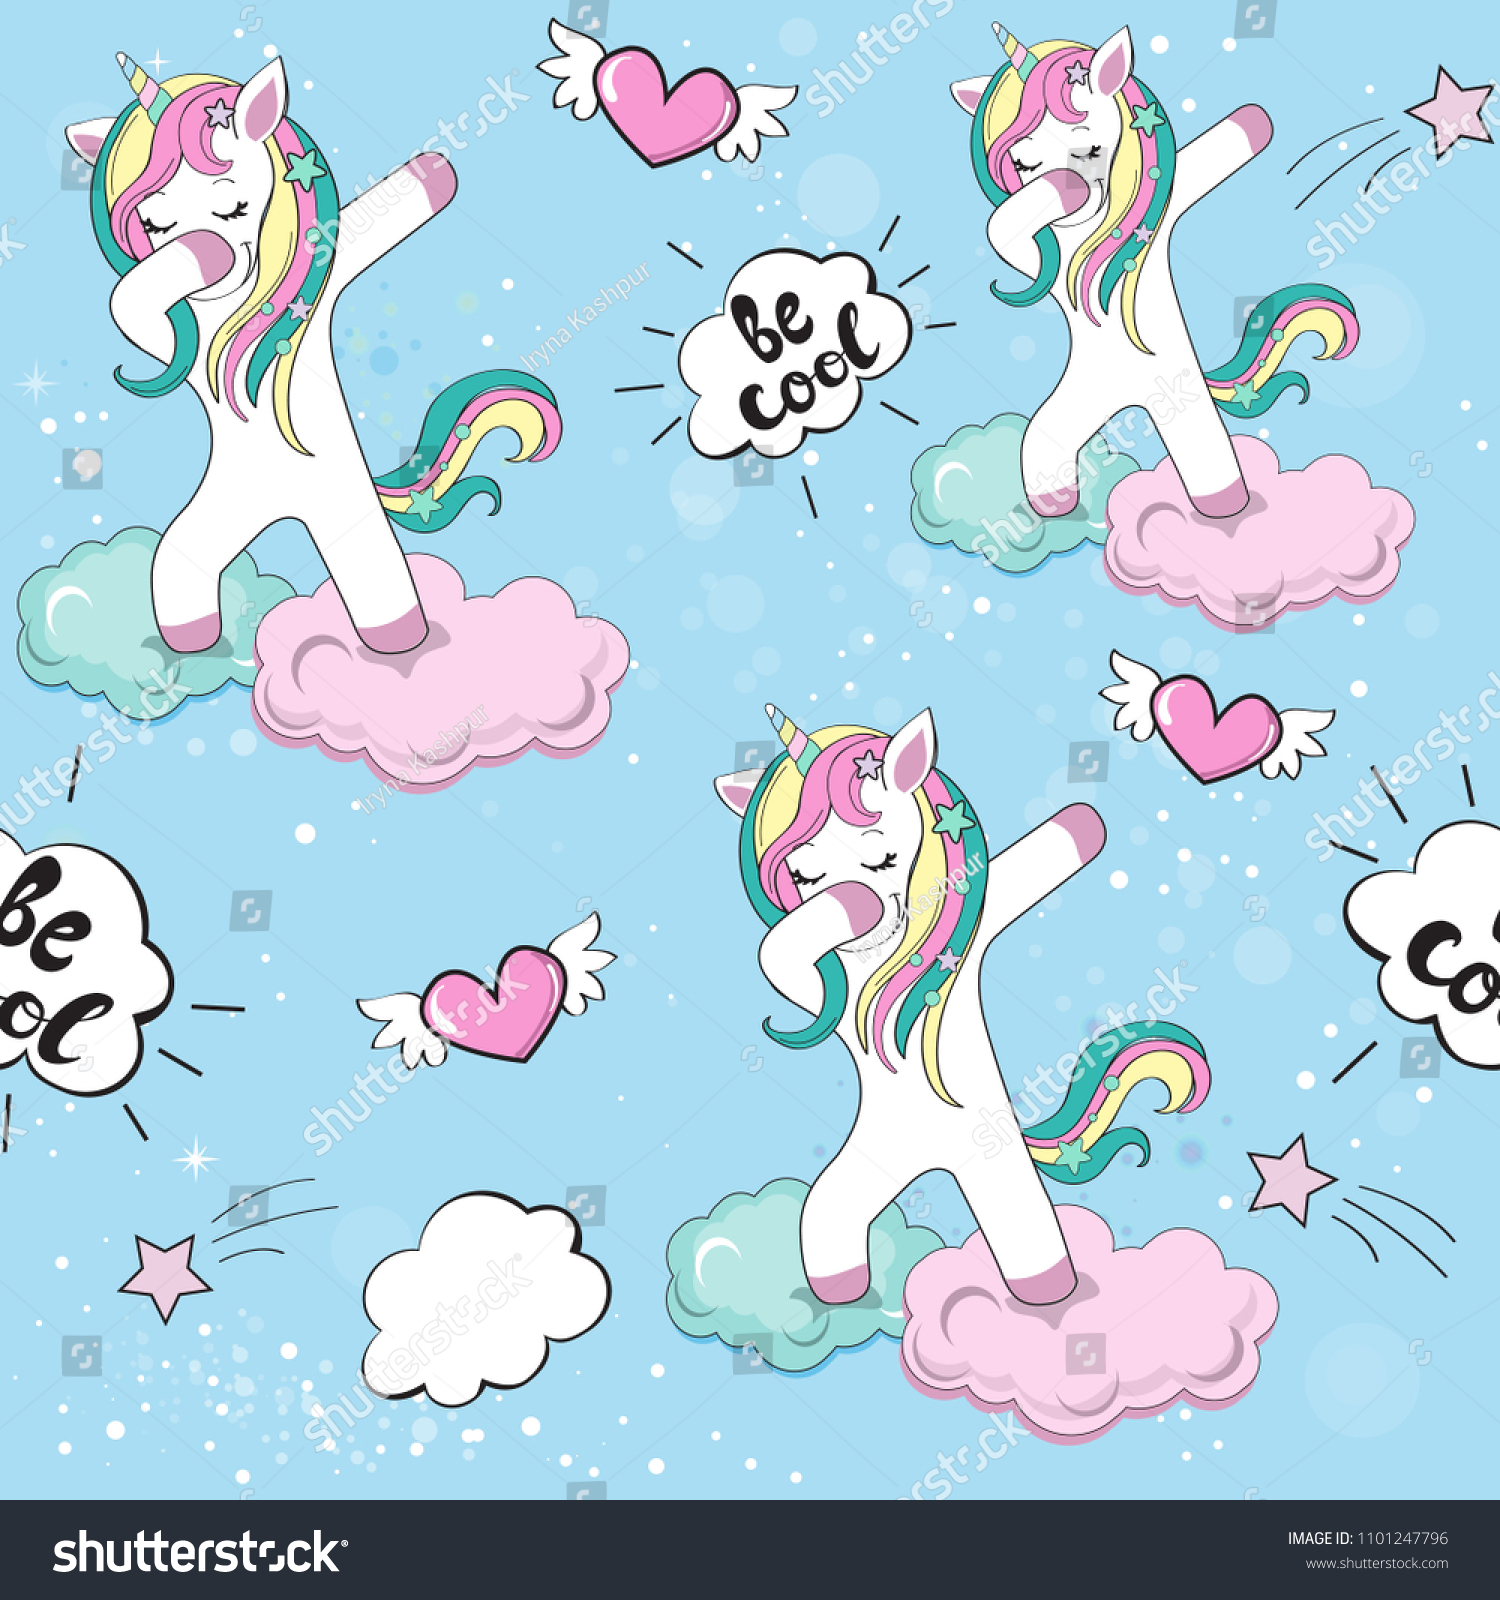 SVG of Dabbing unicorn seamless pattern in the blue sky with clouds svg